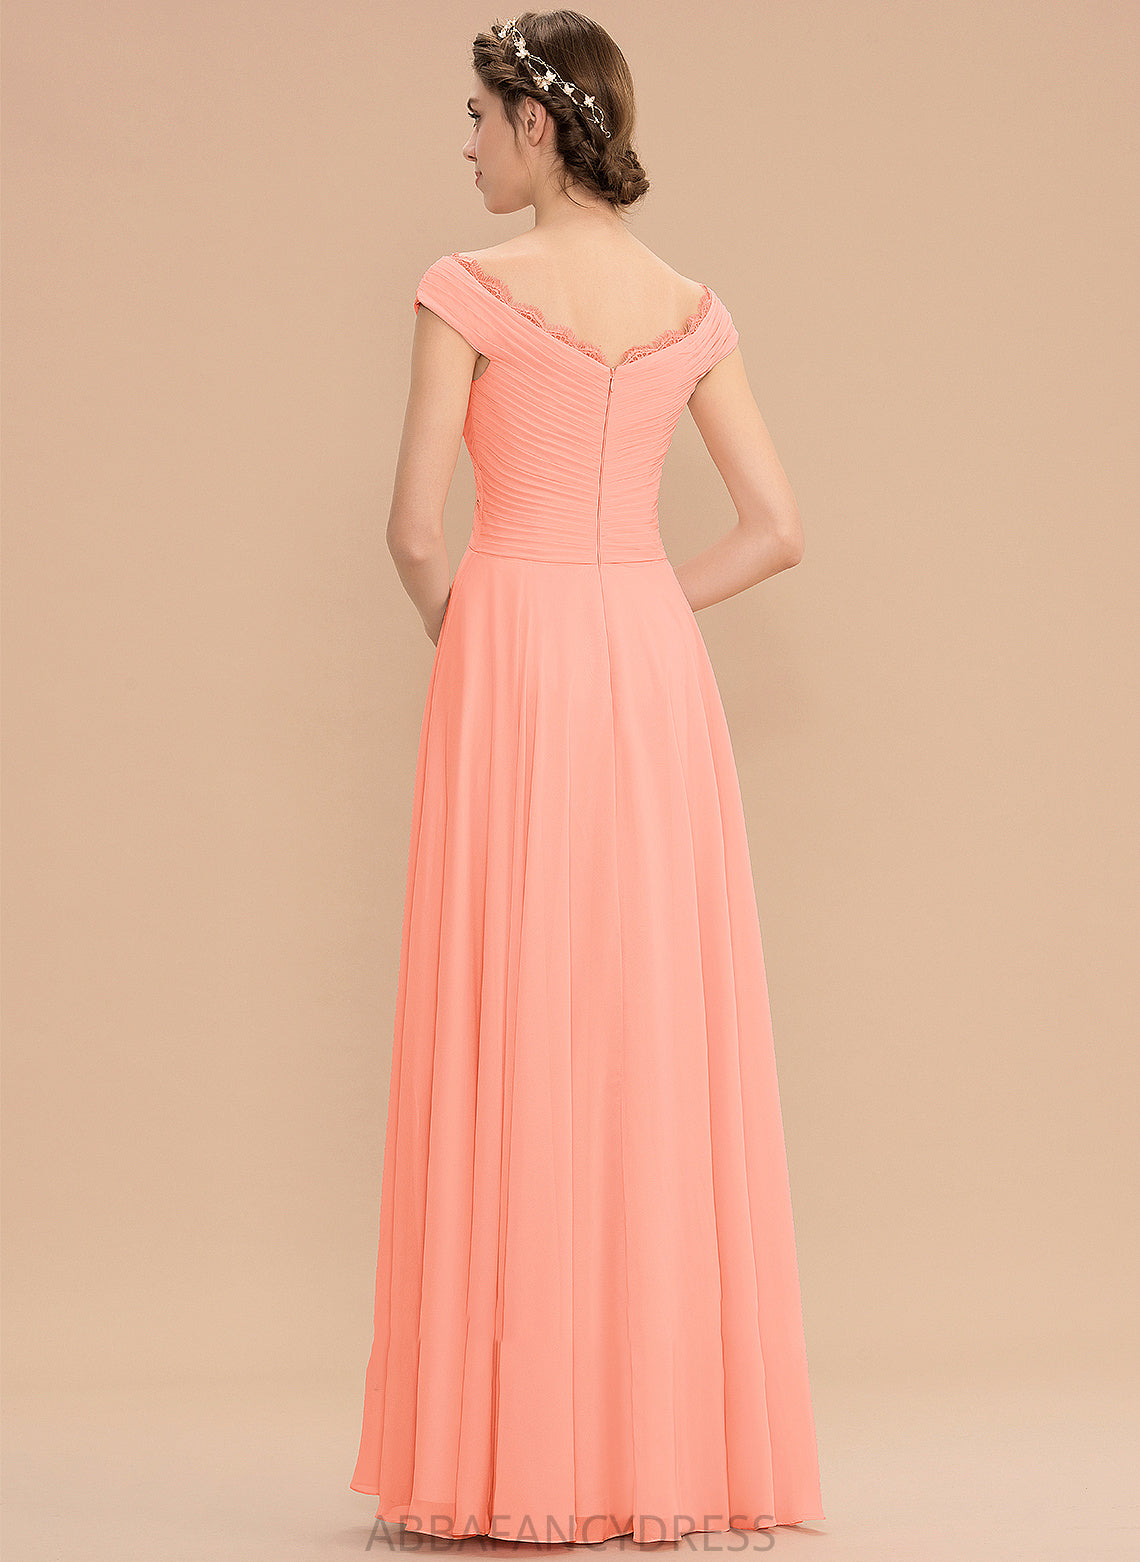 Silhouette Lace Ruffle Length A-Line Neckline Fabric Off-the-Shoulder Embellishment Floor-Length Molly Natural Waist